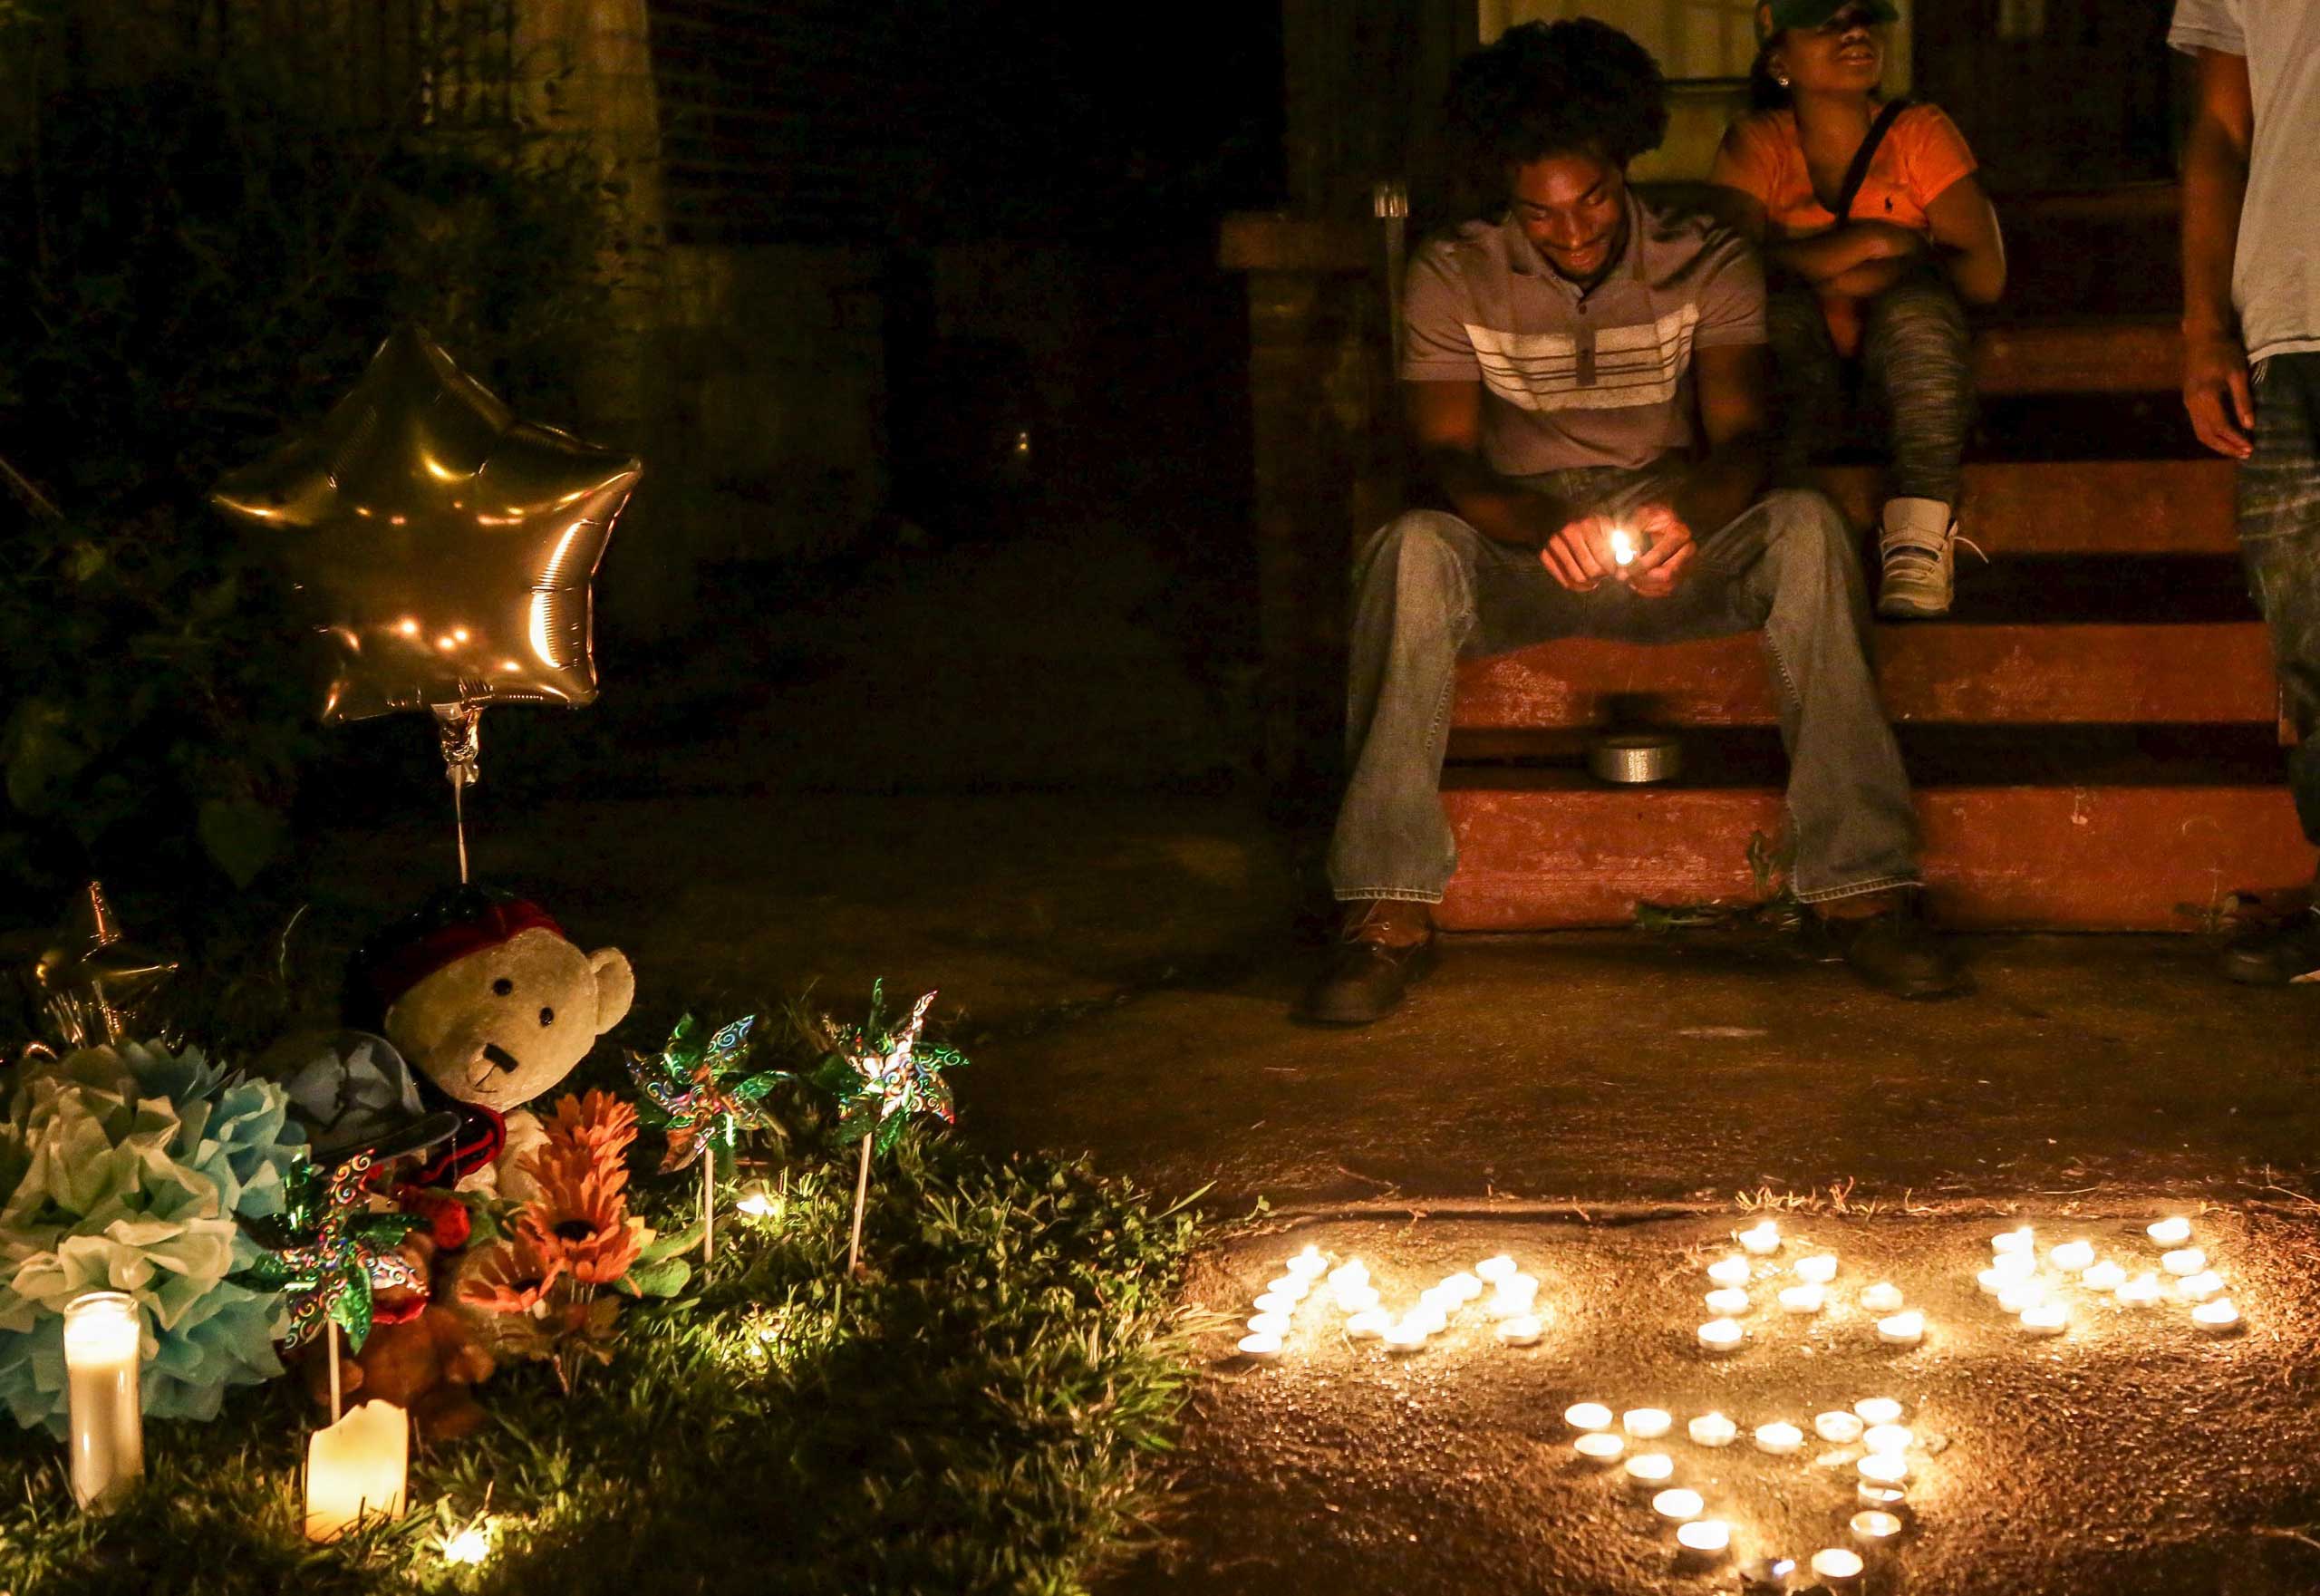 Chris Ball-Bey, the brother of Mansur Ball-Bey, sits by his brother's memorial after a candlelight vigil on Walton Ave in St. Louis, Mo., on Aug. 20, 2015. (Lawrence Bryant—Reuters)